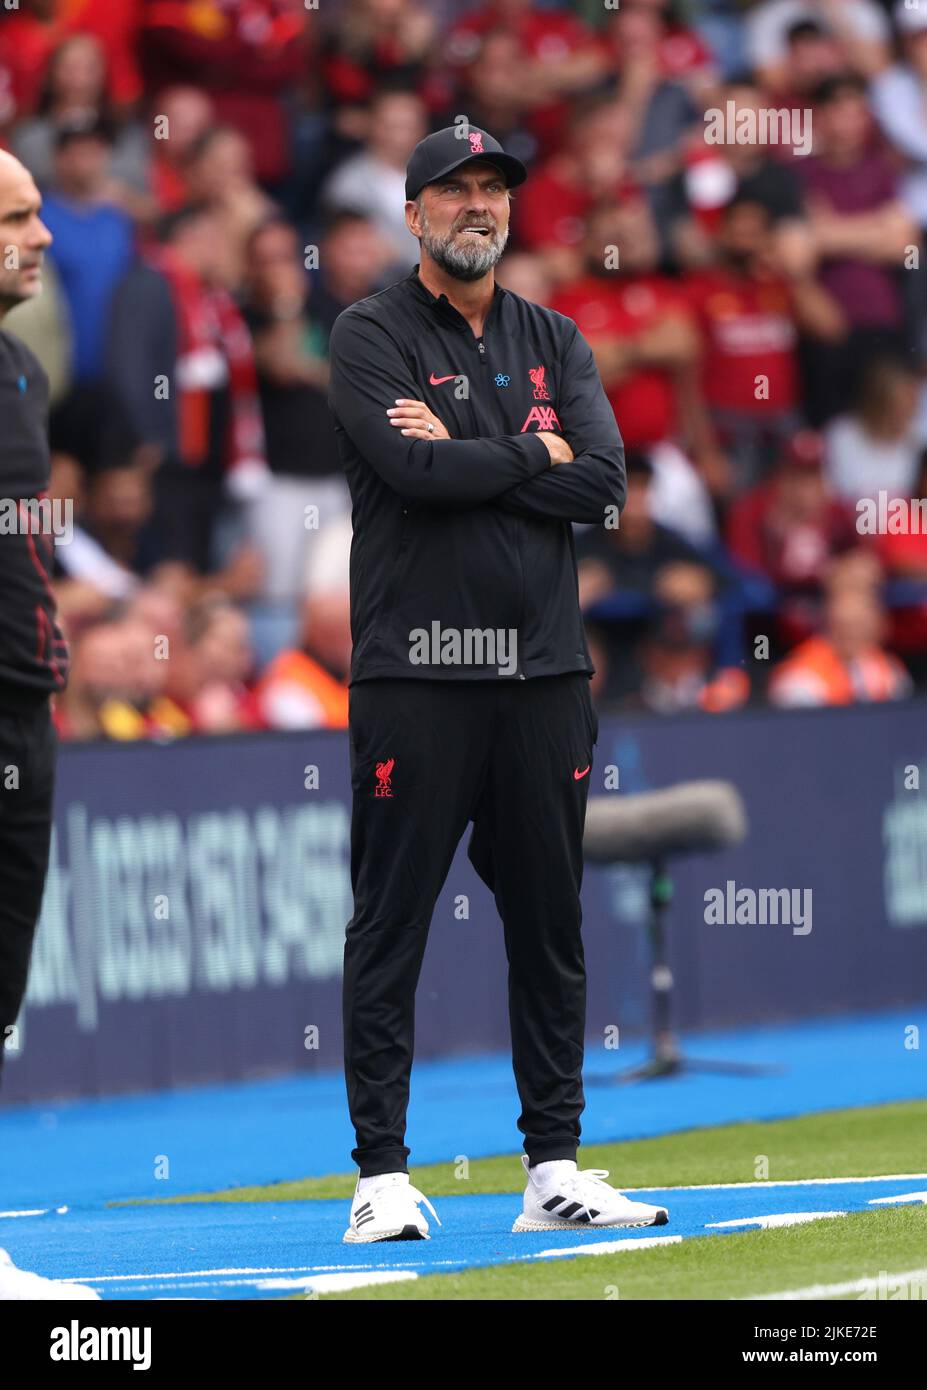 Leicester, UK. 30th July, 2022. Jurgen Klopp (Liverpool manager) at the FA Community Shield match Liverpool v Manchester City, at King Power Stadium, Leicester, UK, on July 30, 2022 Credit: Paul Marriott/Alamy Live News Stock Photo